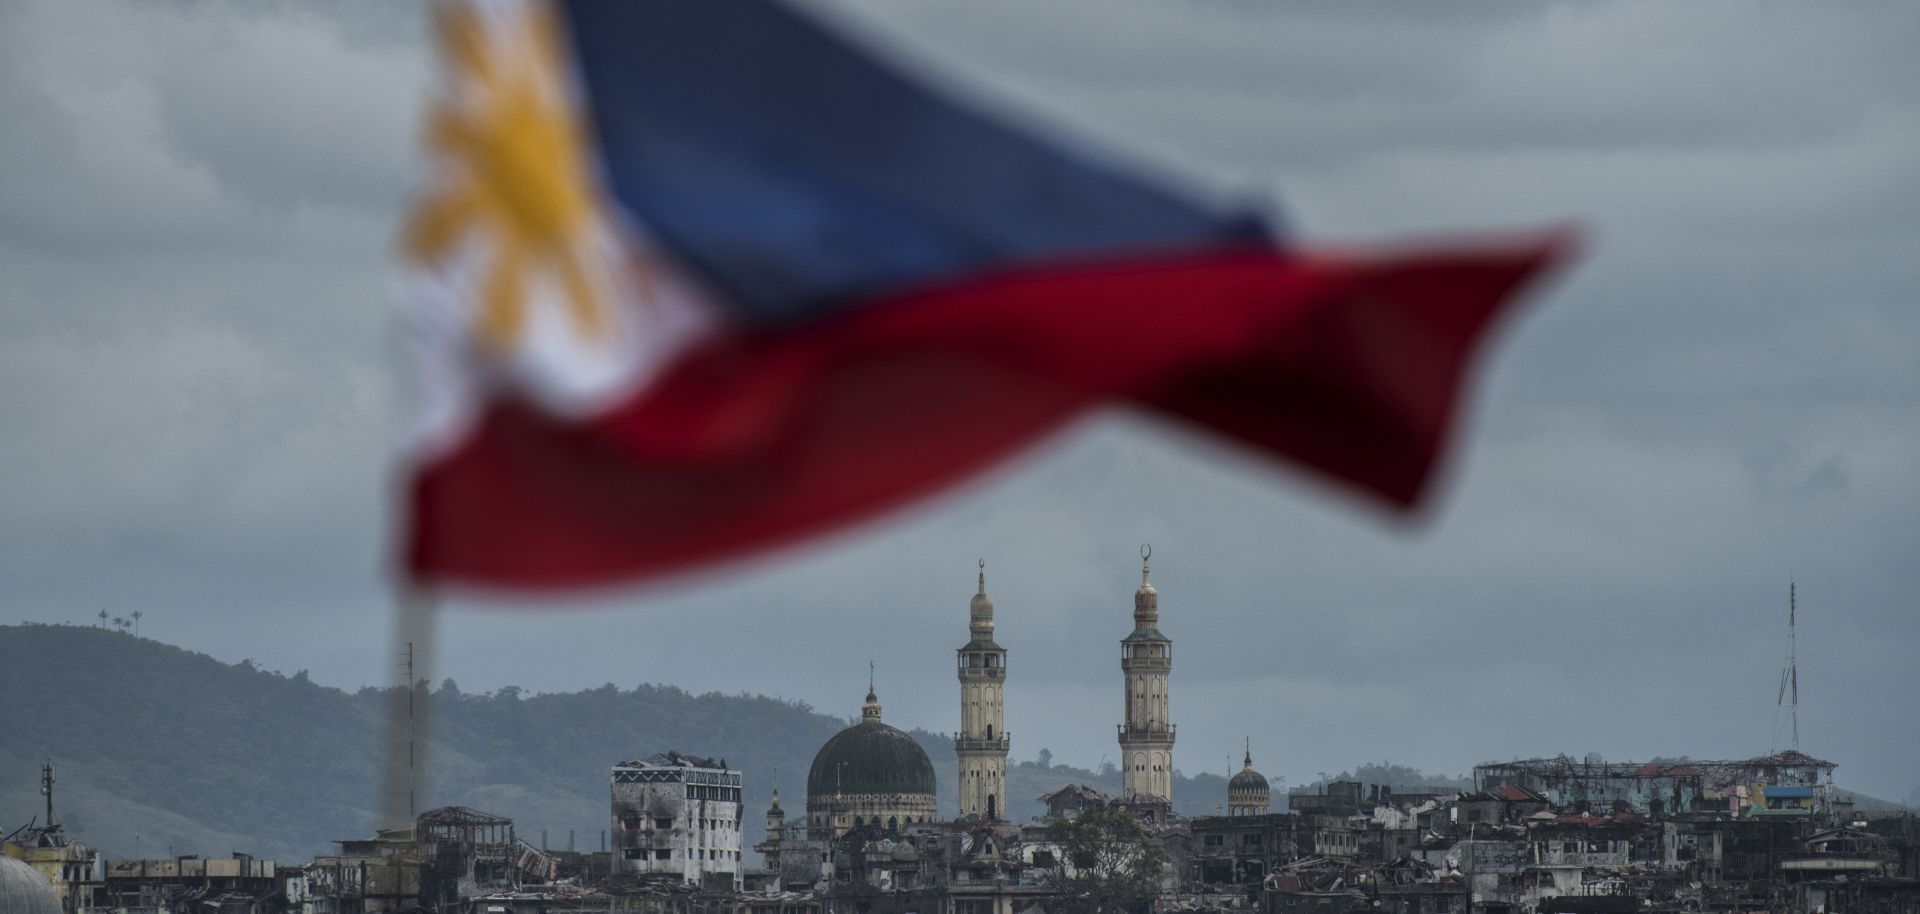 The Philippine flag is seen waving over the besieged city of Marawi.